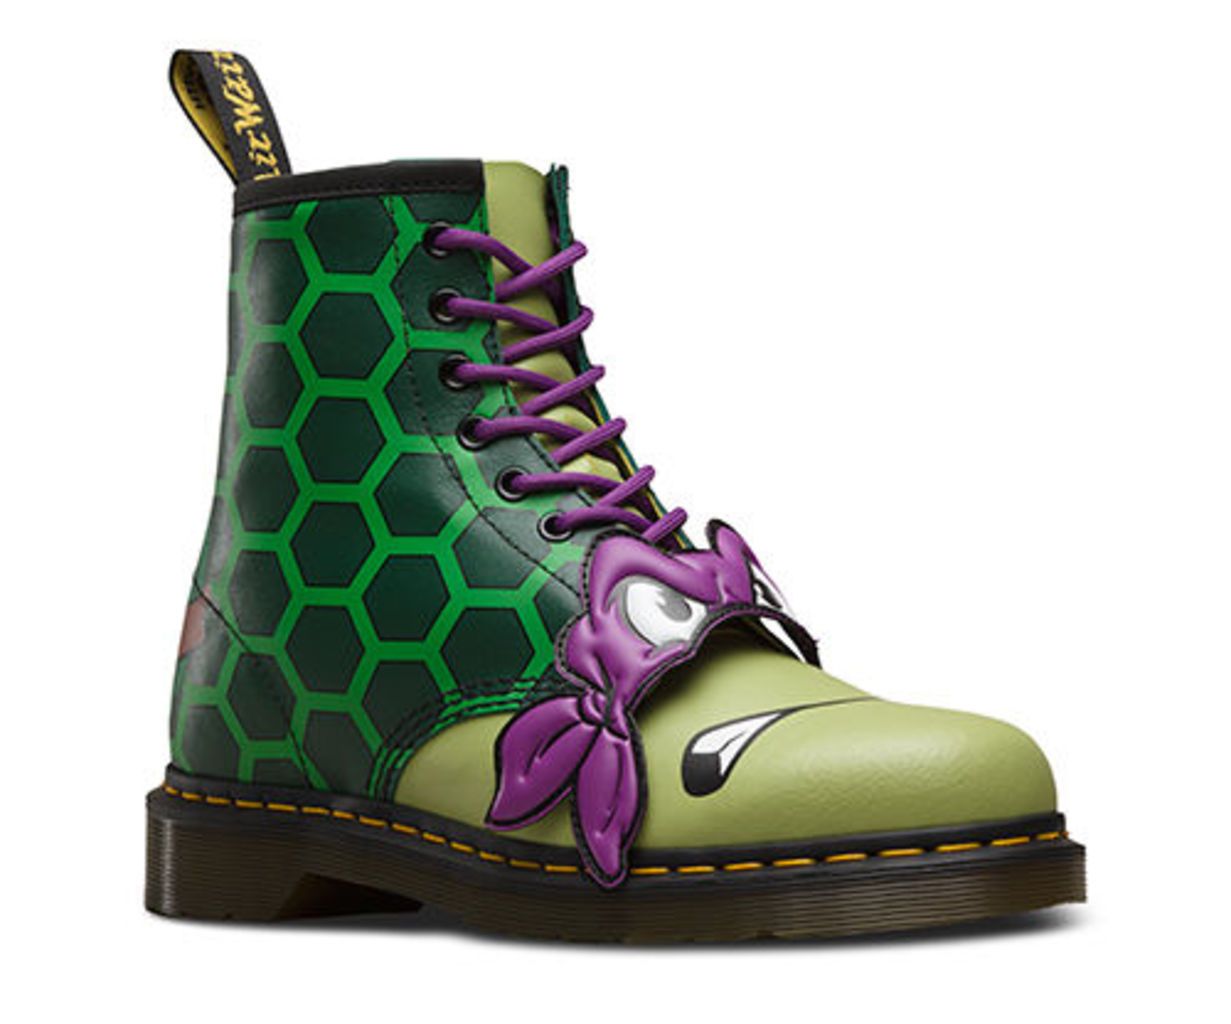 Donnie TMNT Boot